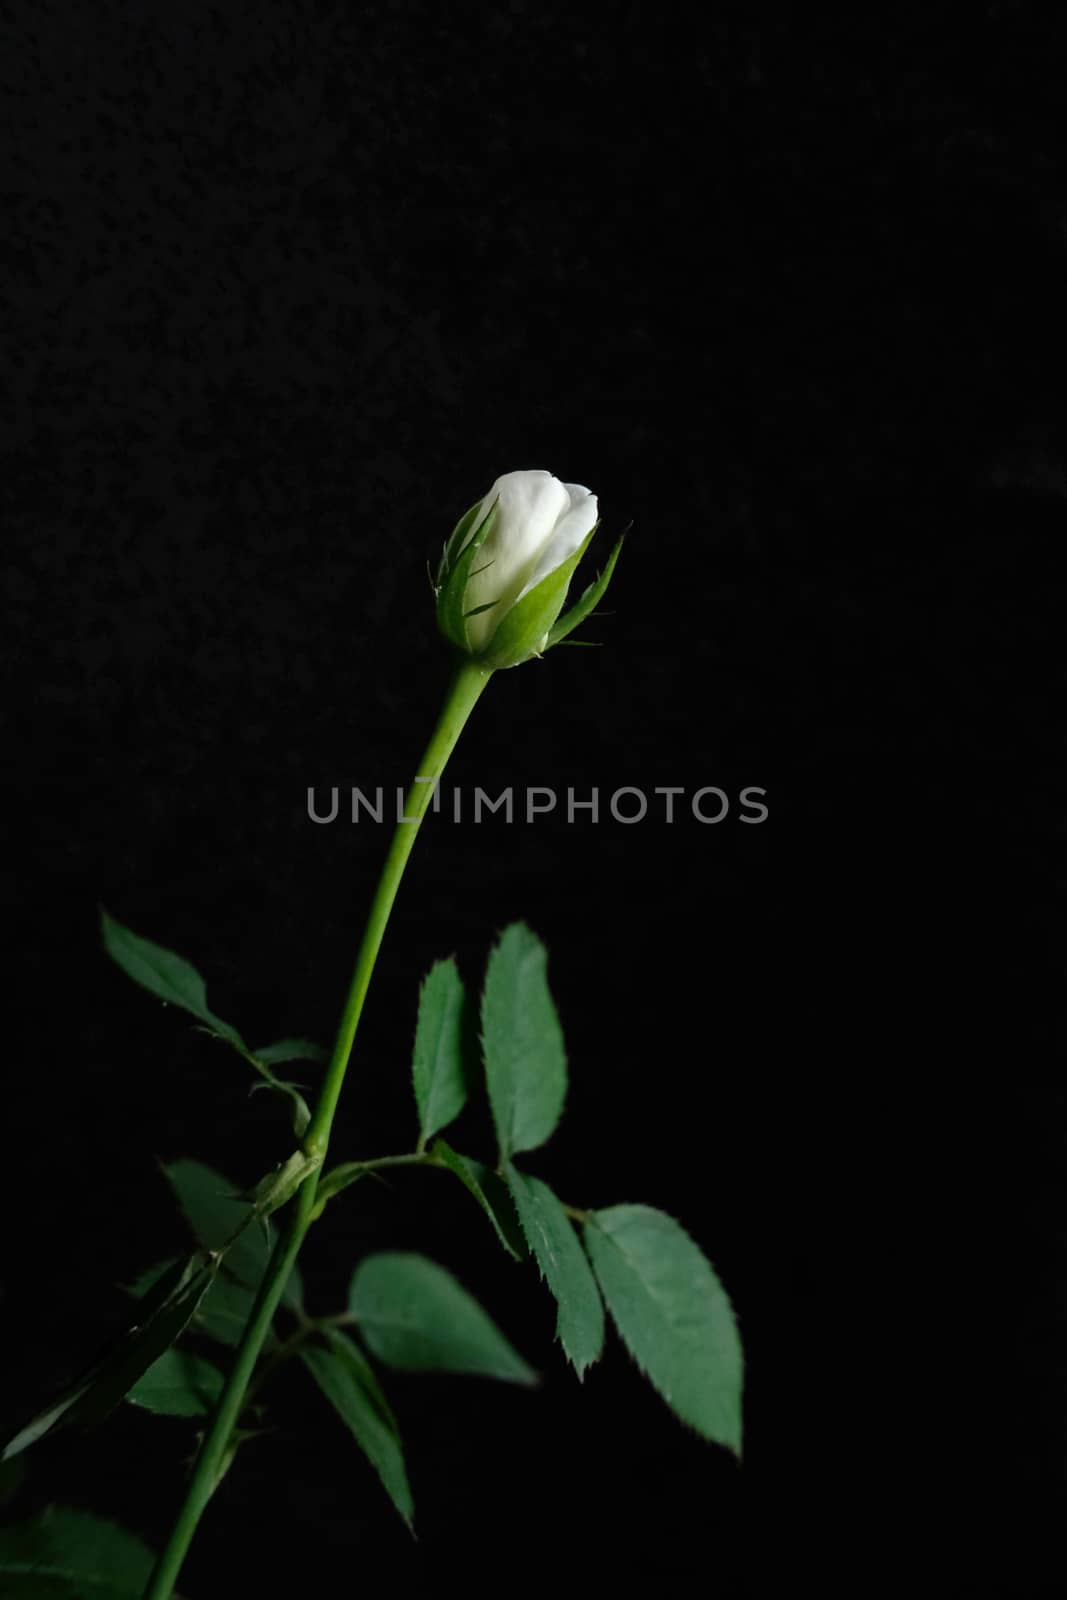 white rose bud flower with stem and leaf by Macrostud